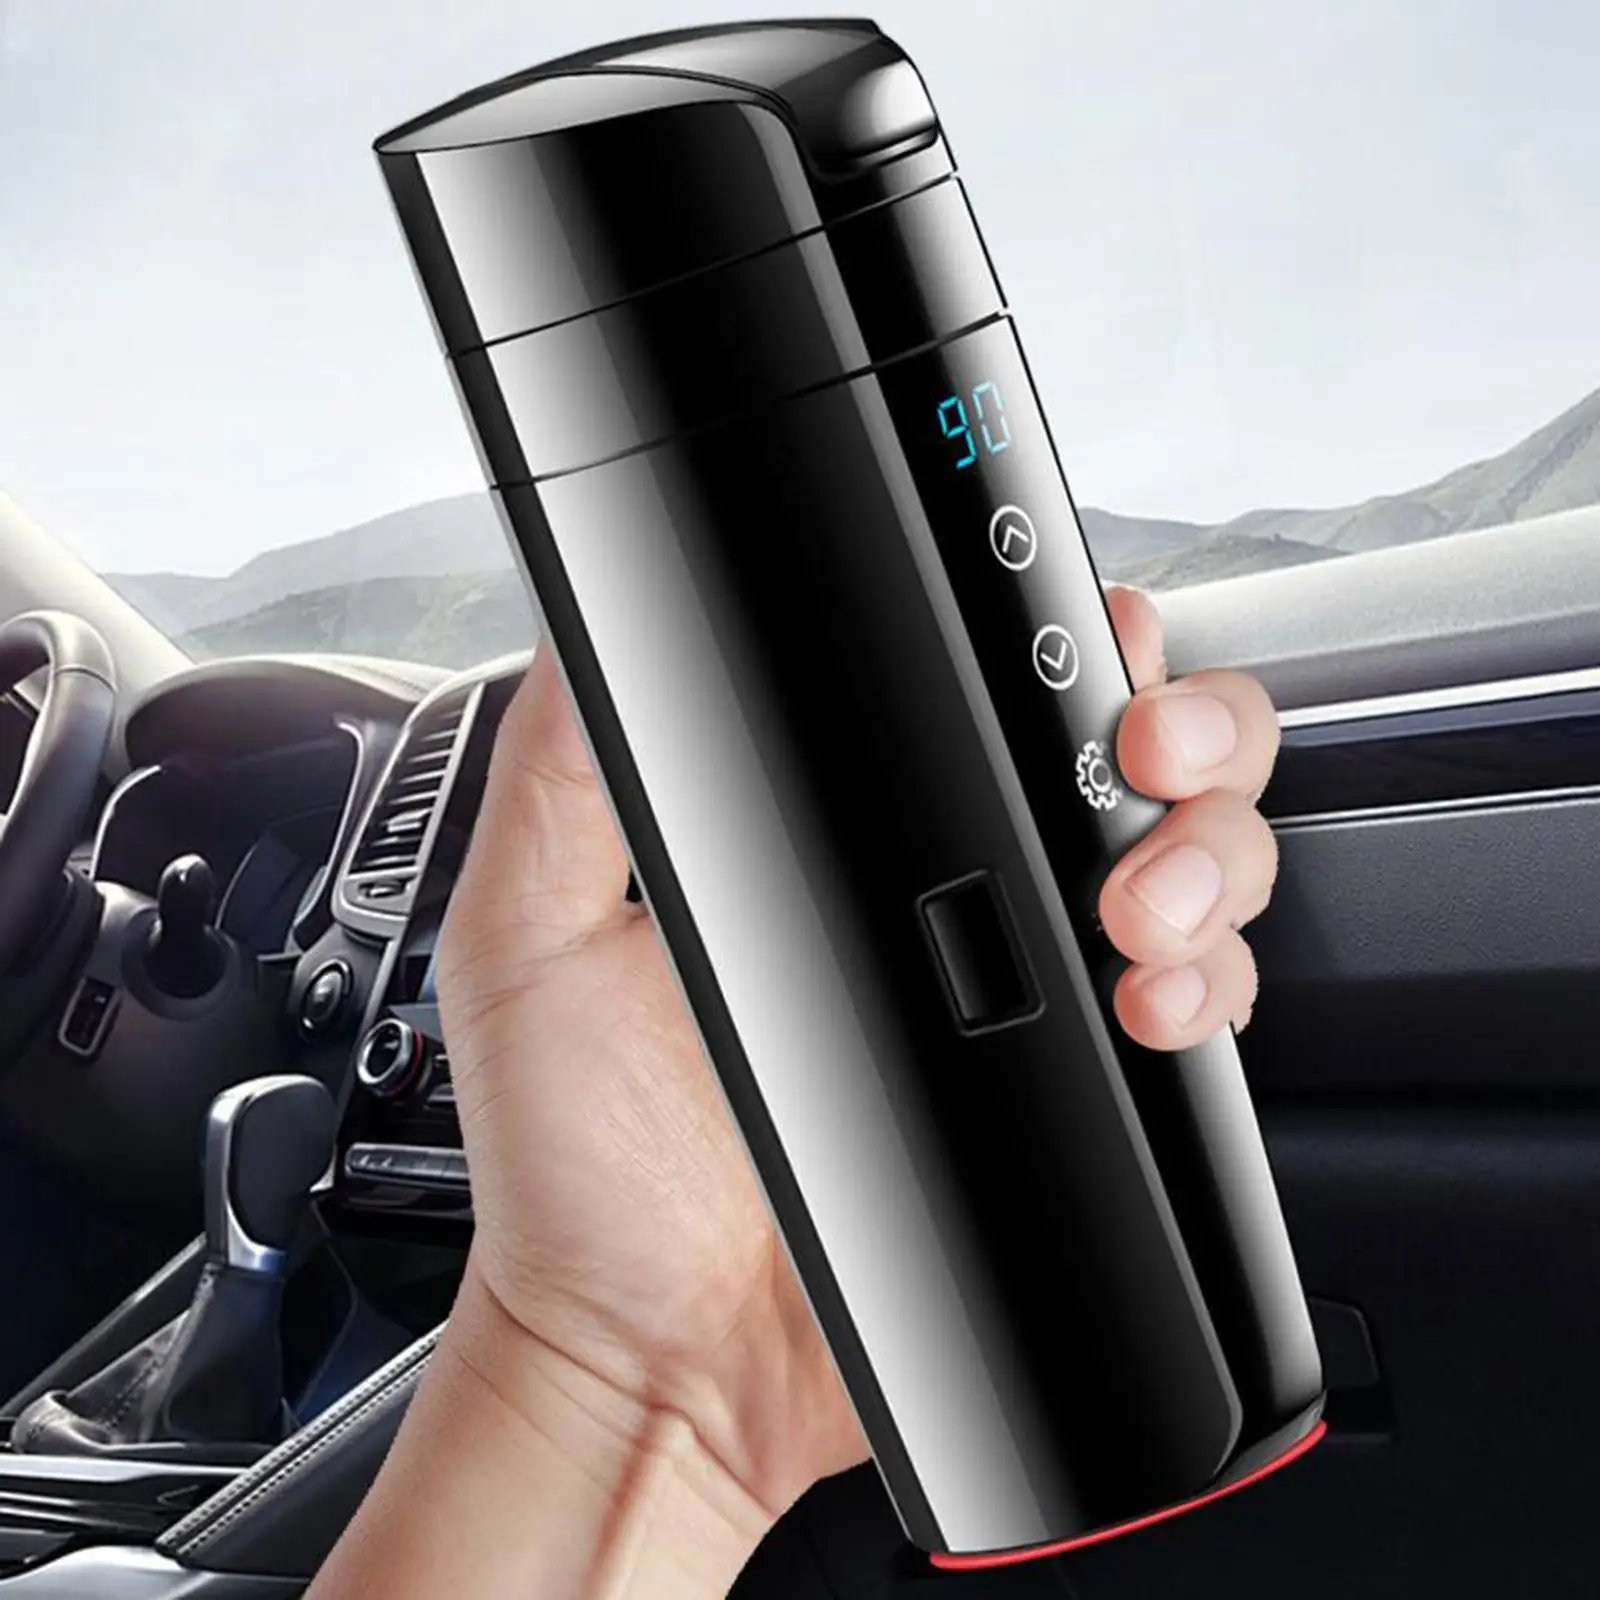 Car Kettle Boiler Smart Heating Insulated Cup Fits for